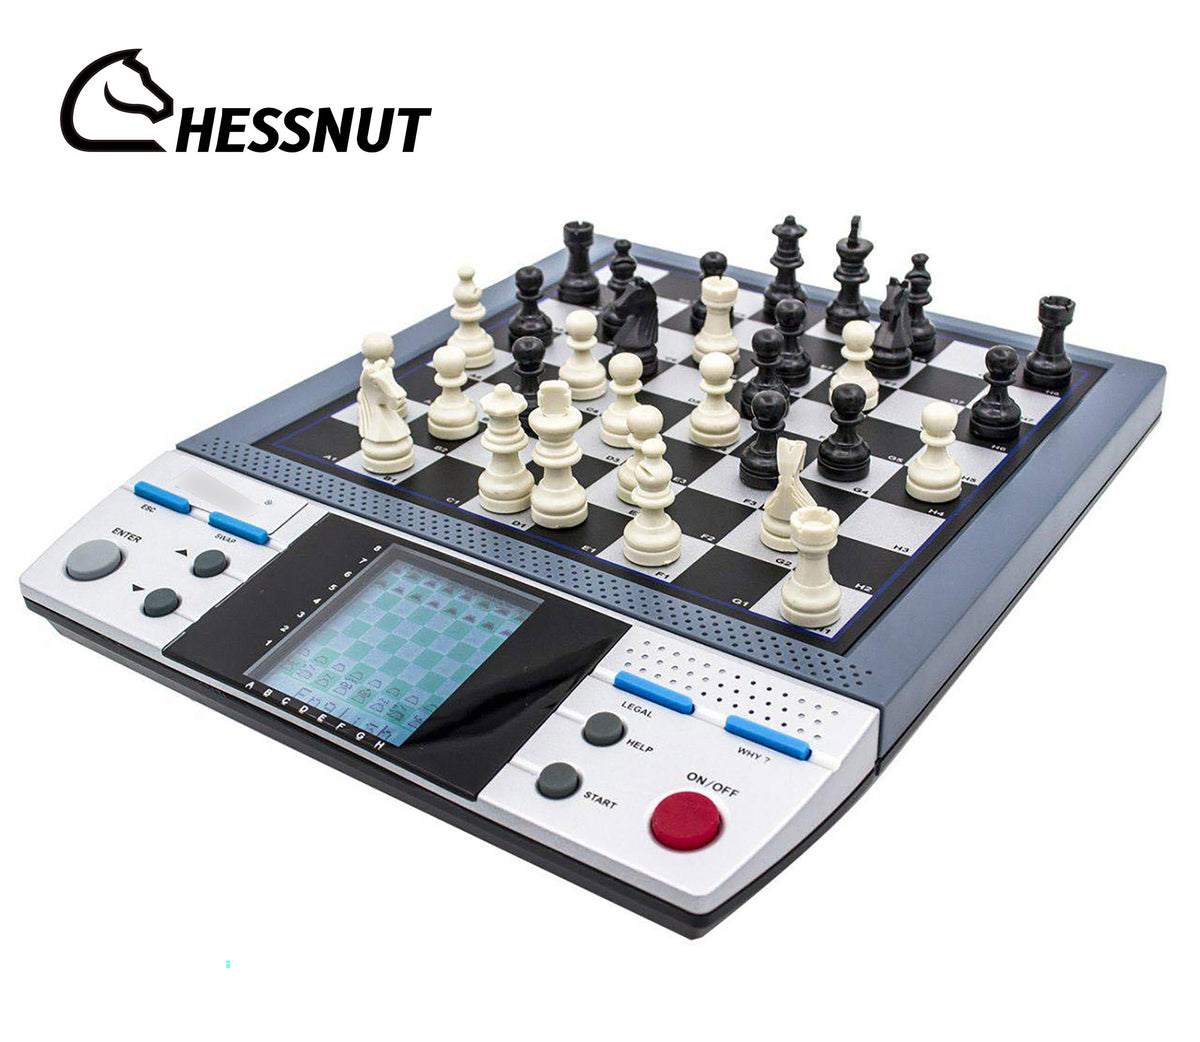 Chessnut's Black Friday: Elevate Your Game!